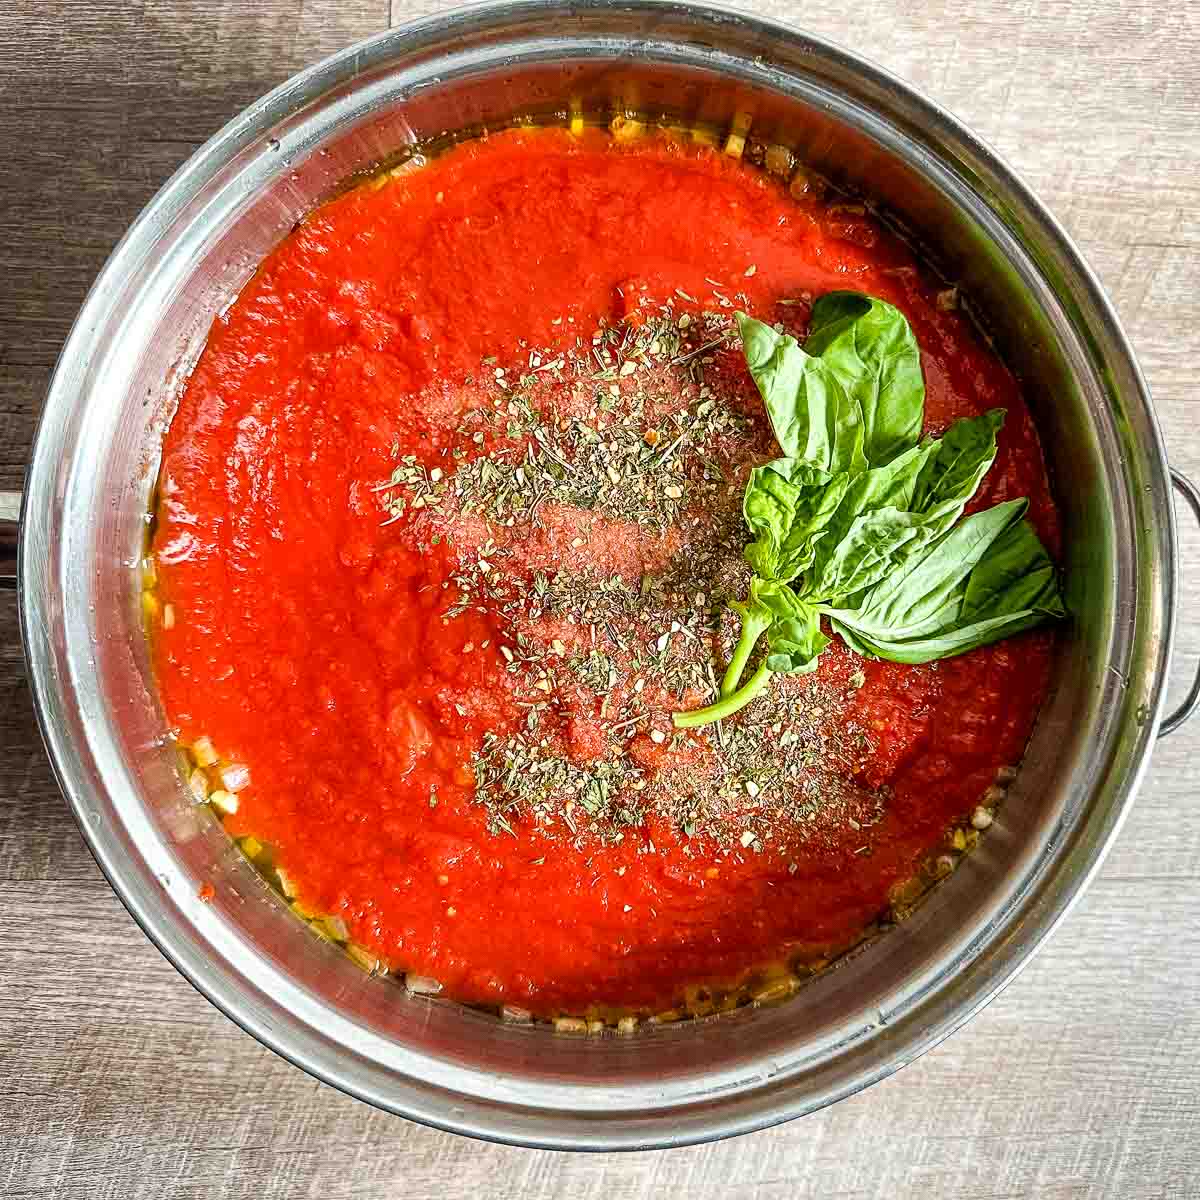 Tomatoes, Italian herbs, salt, pepper, and fresh basil are added to the pot.